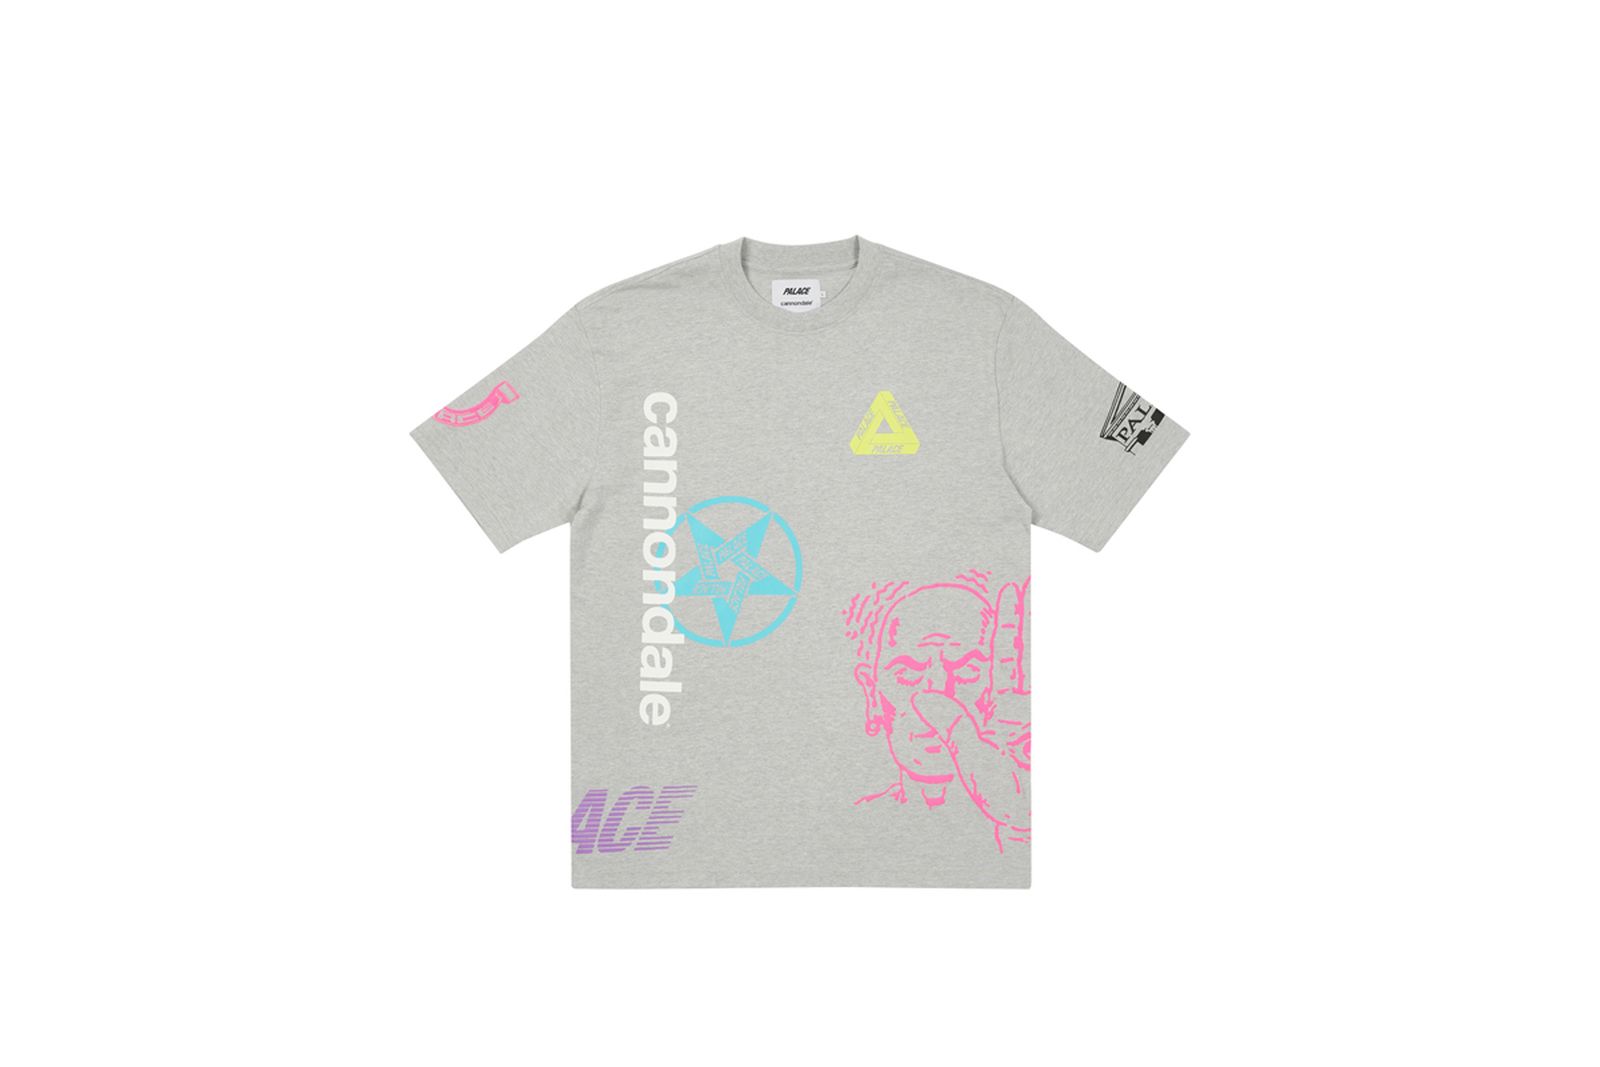 palace-cannondale-fw21-collab- (79)